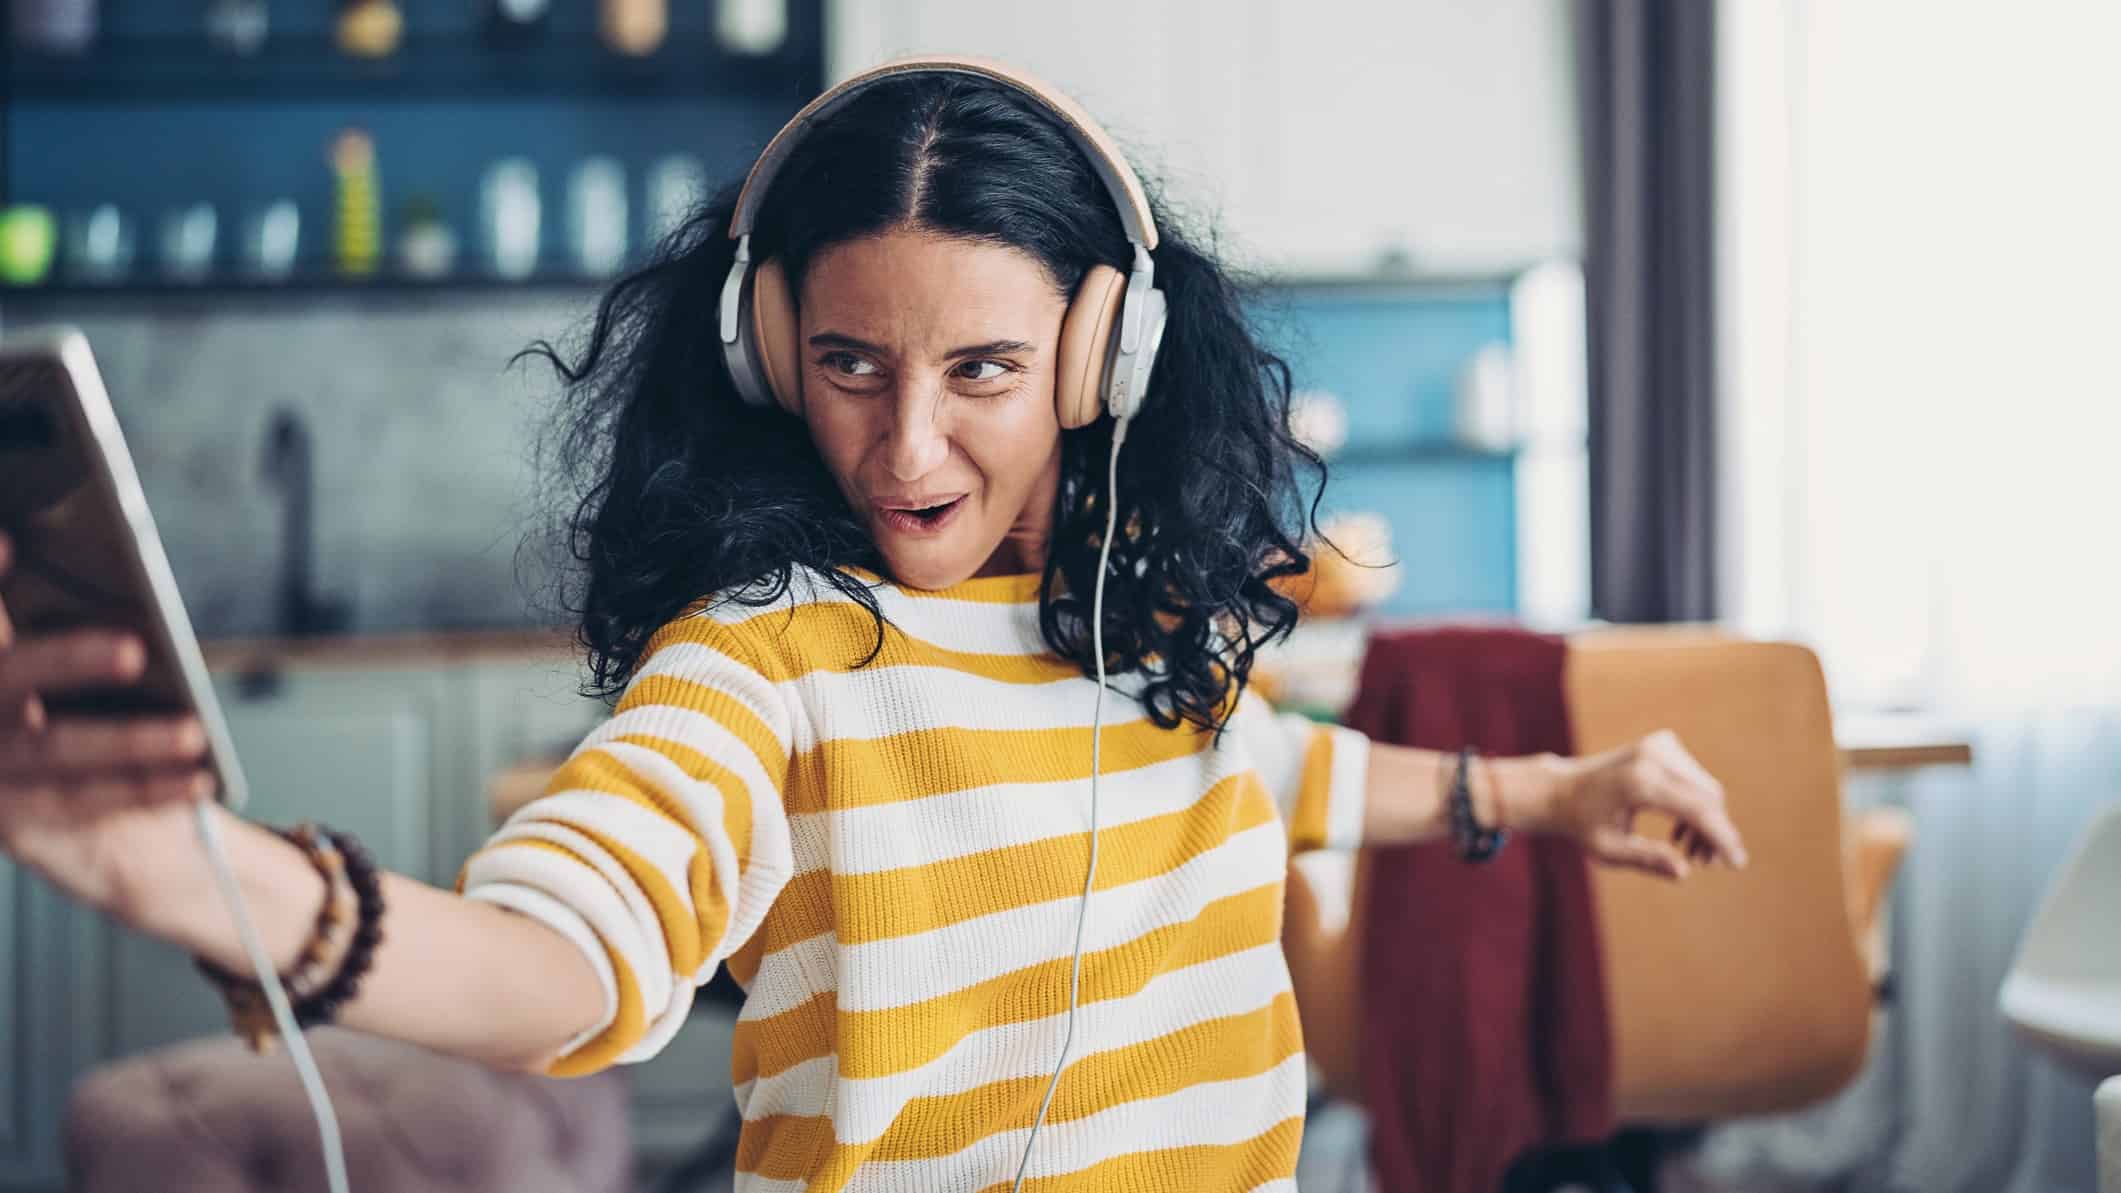 A woman wearing a yellow and white striped top and headphones plays excitedly with her phone.